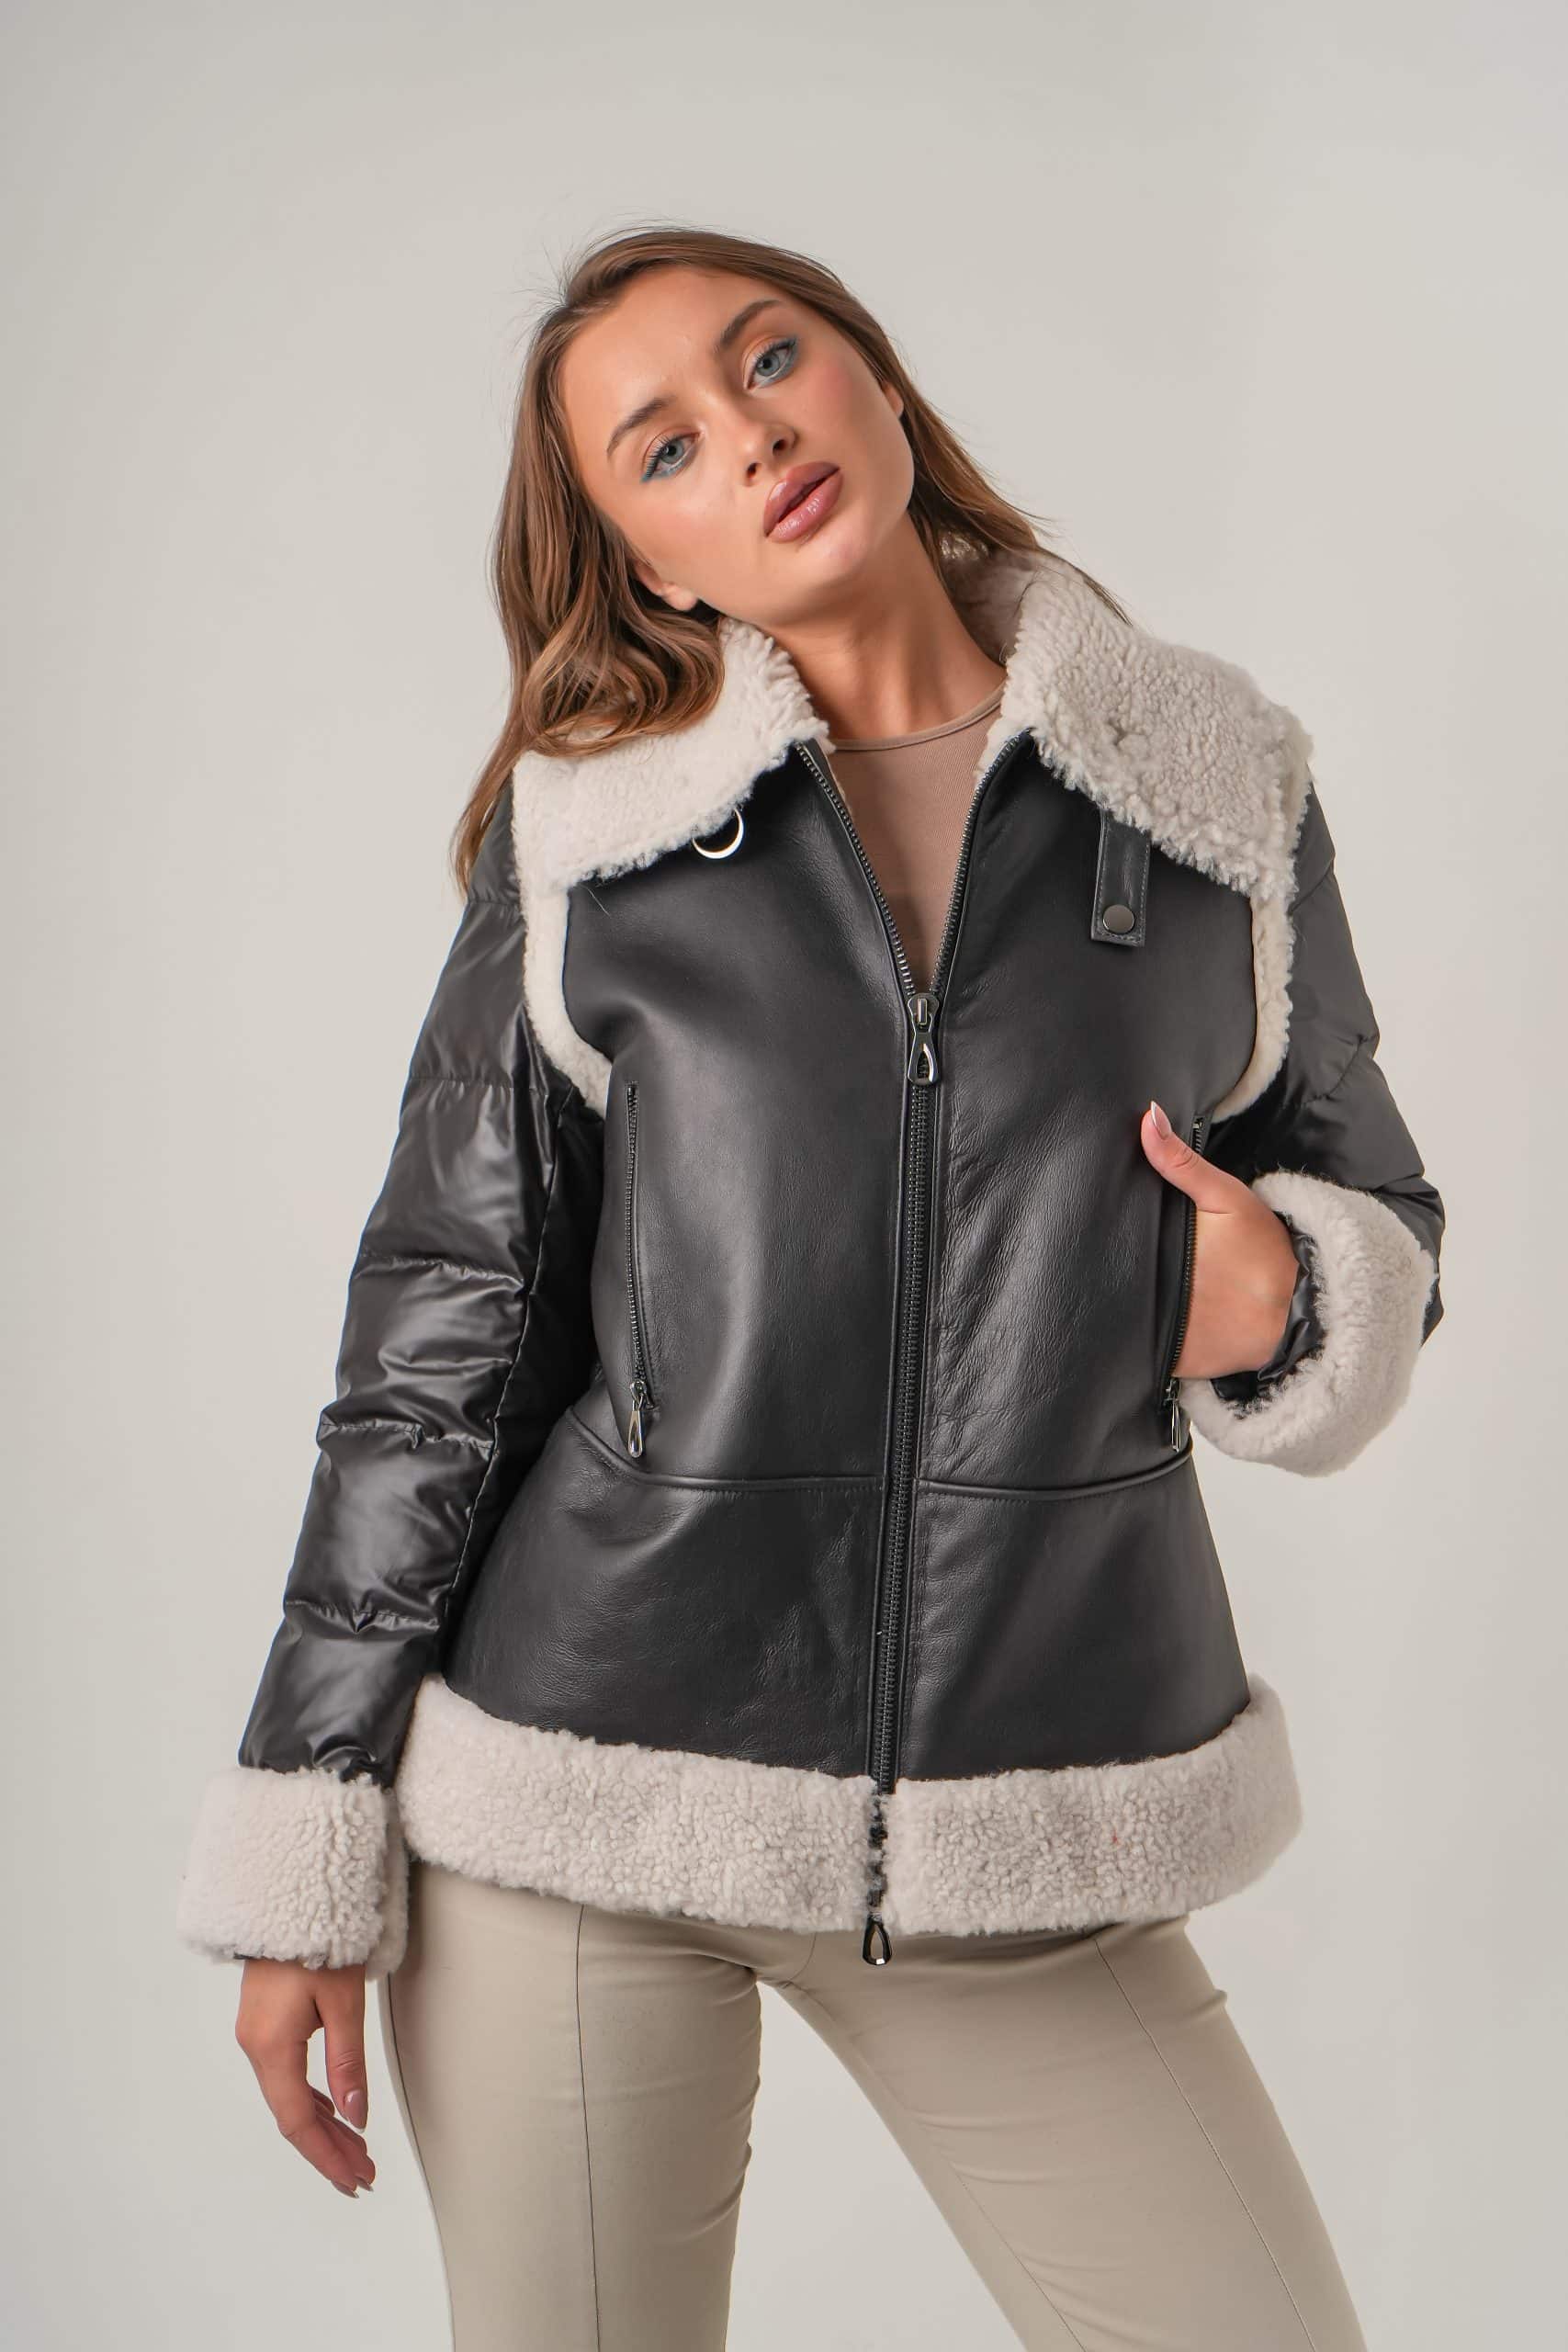 KB-982 Black-White Wool Curly With Fabric Shearling